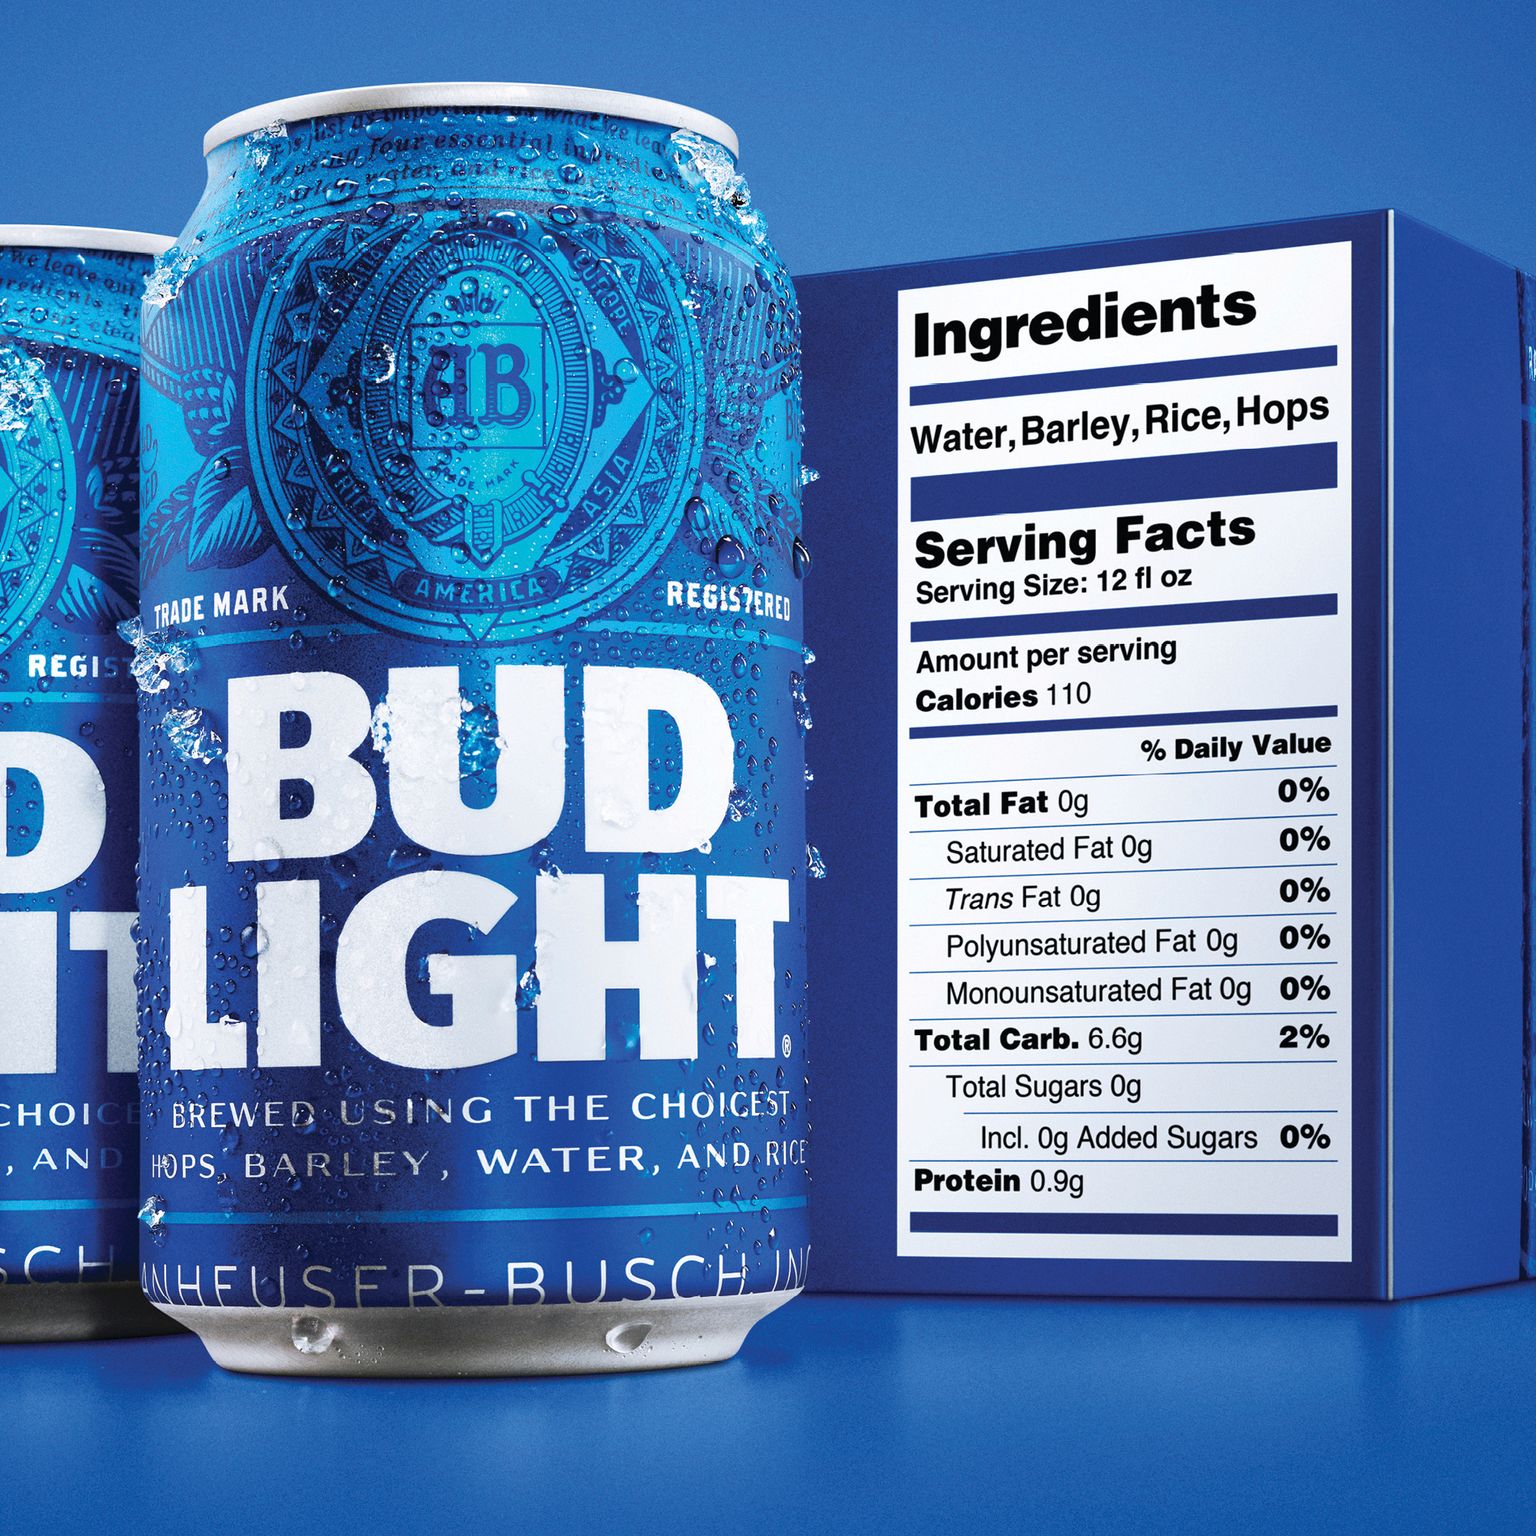 Big beer companies fight over Iowa farmers in the aftermath of Bud Light's Super Bowl ad